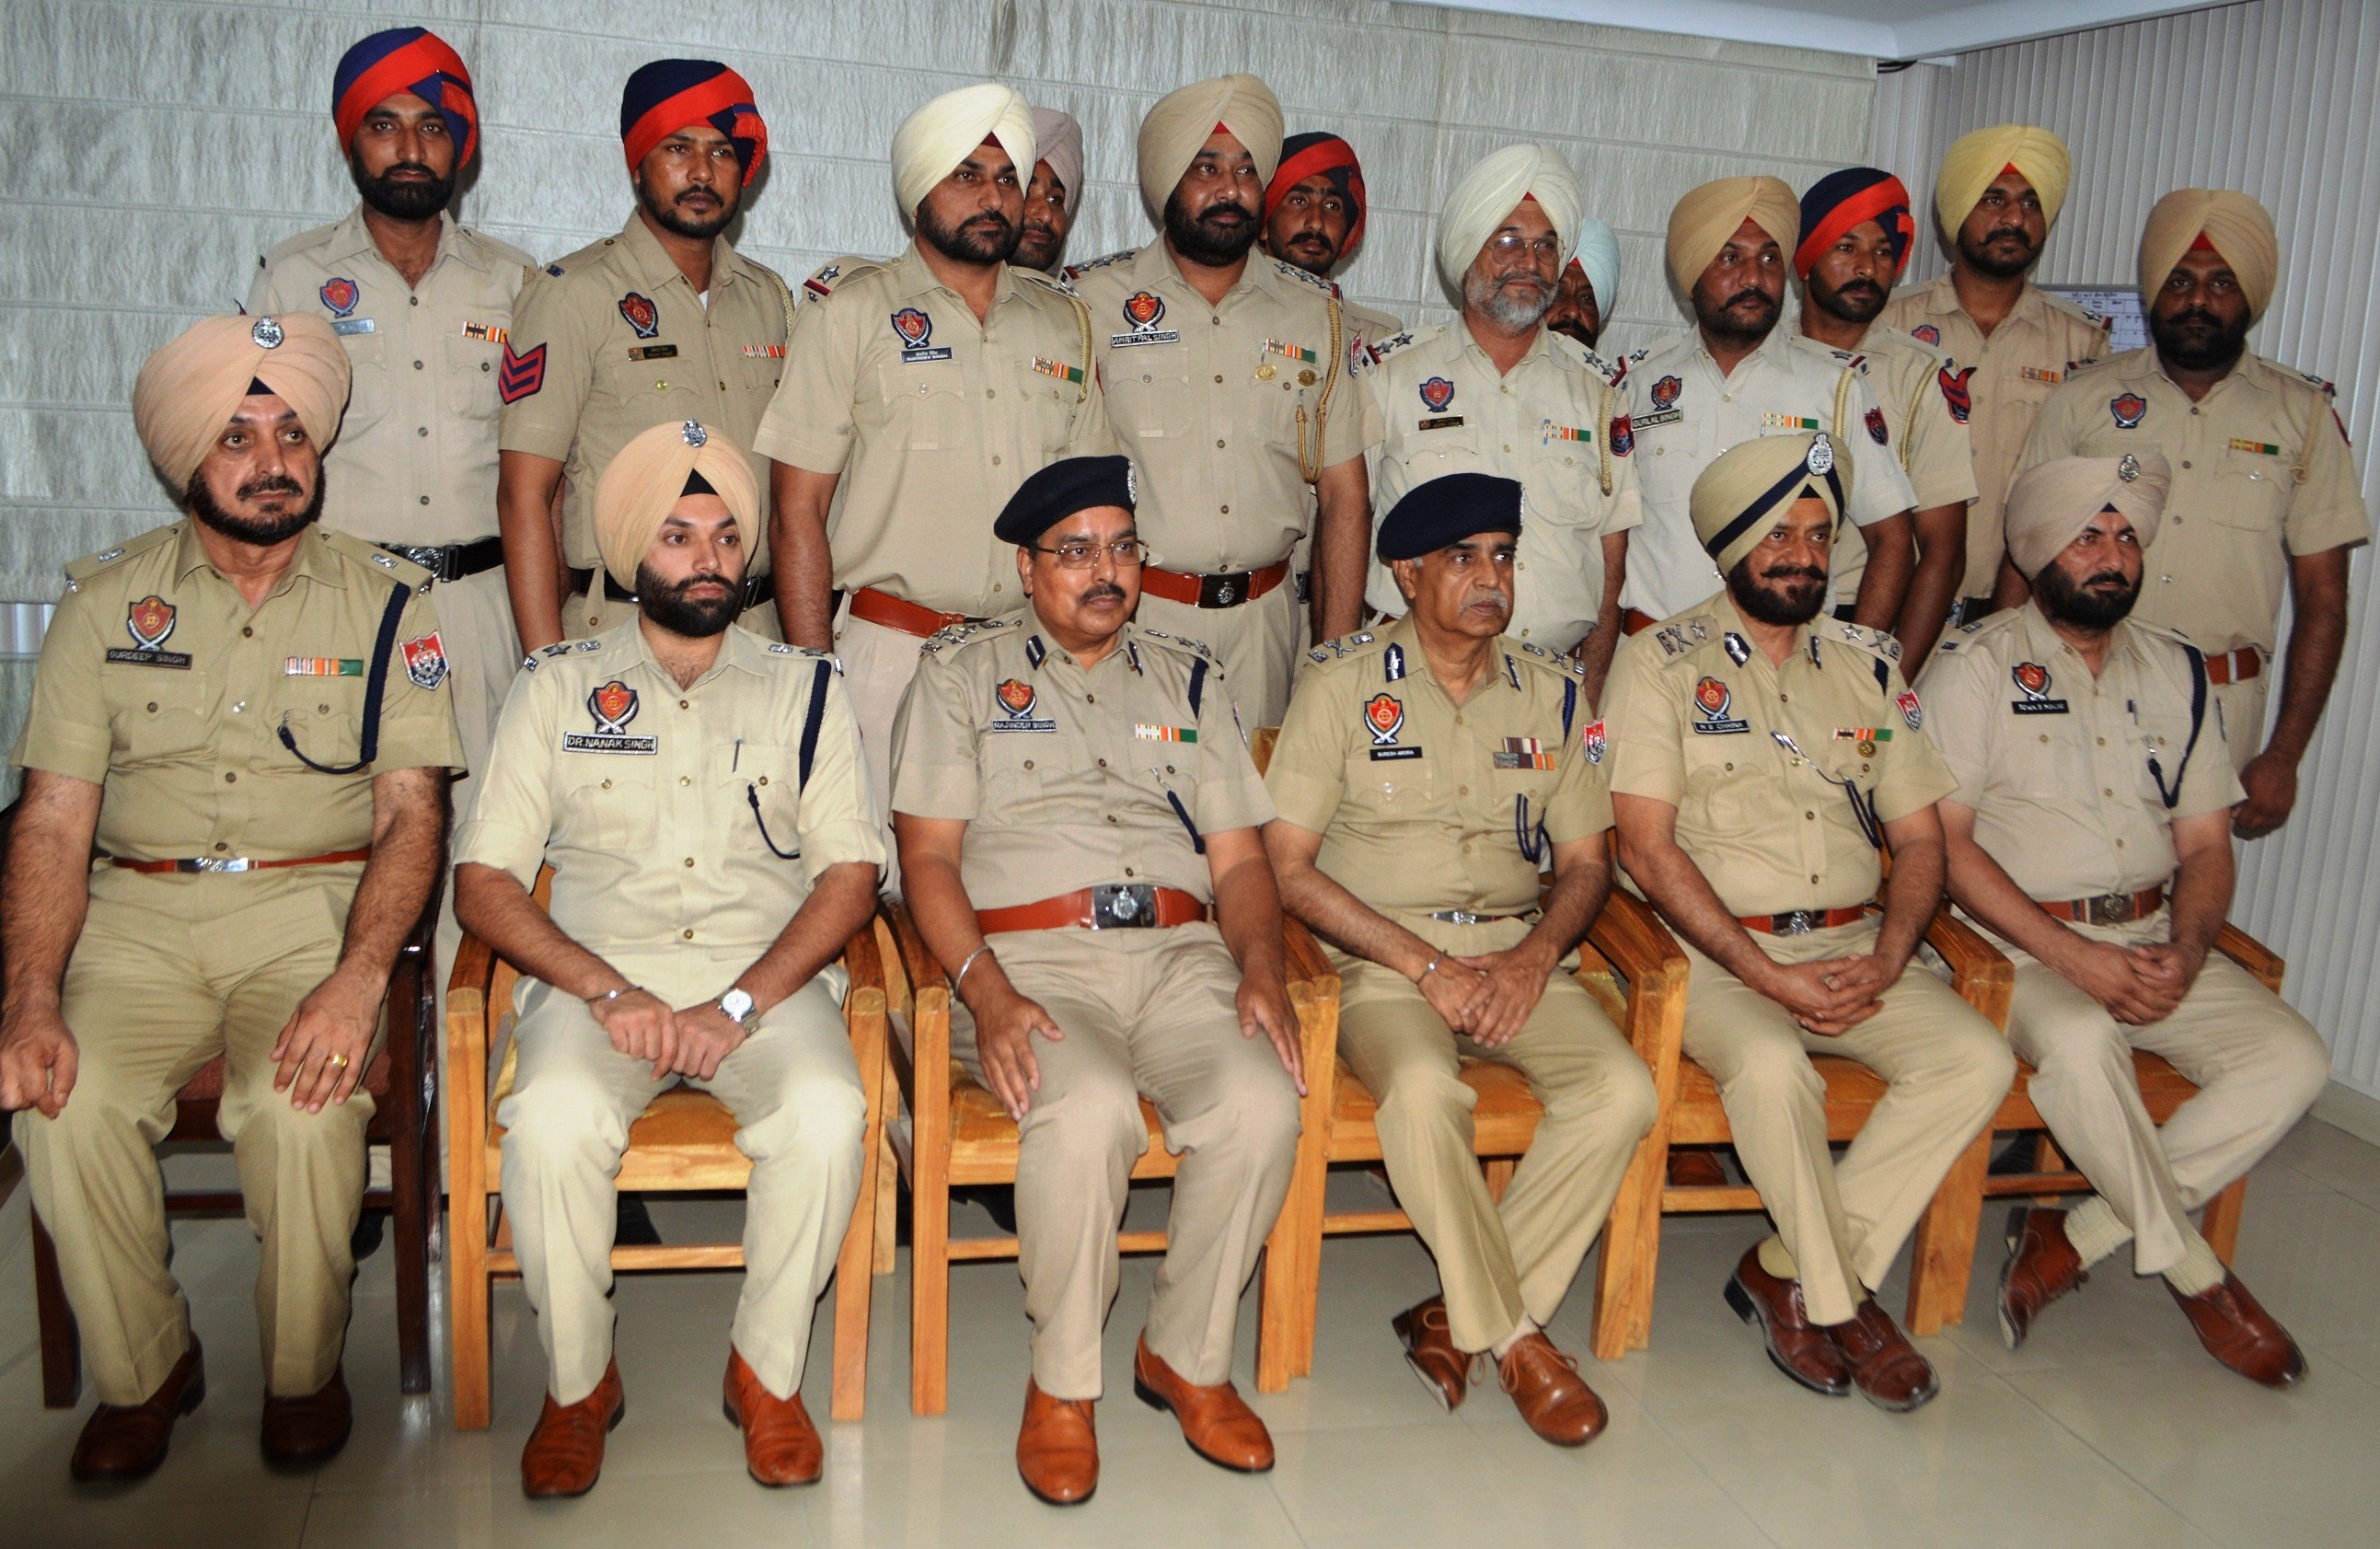 DGP rewards police team with promotions for undertaking successful encounter with dreaded gangsters